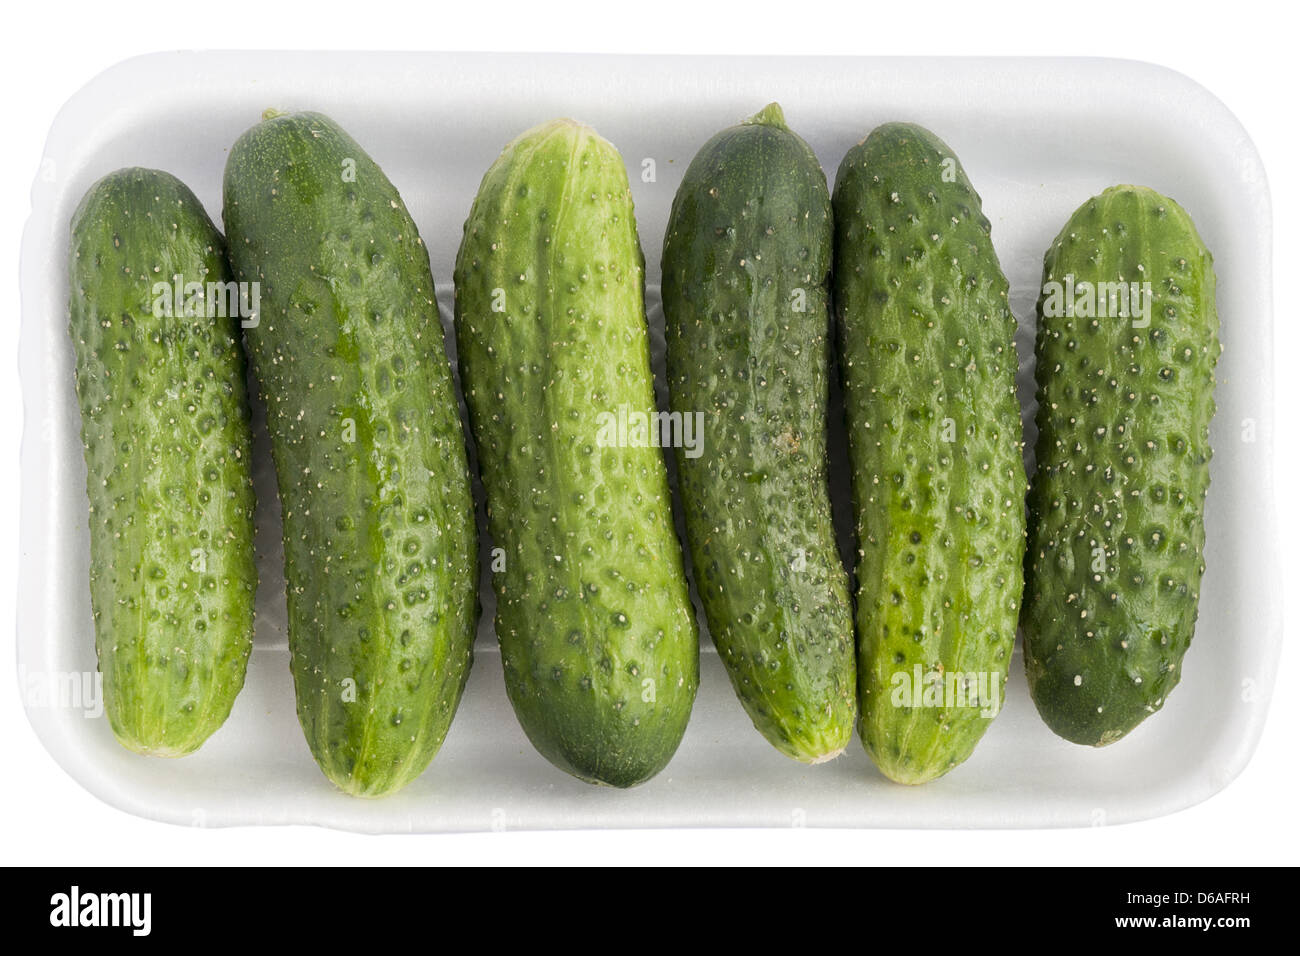 Limp old green cucumbers Stock Photo